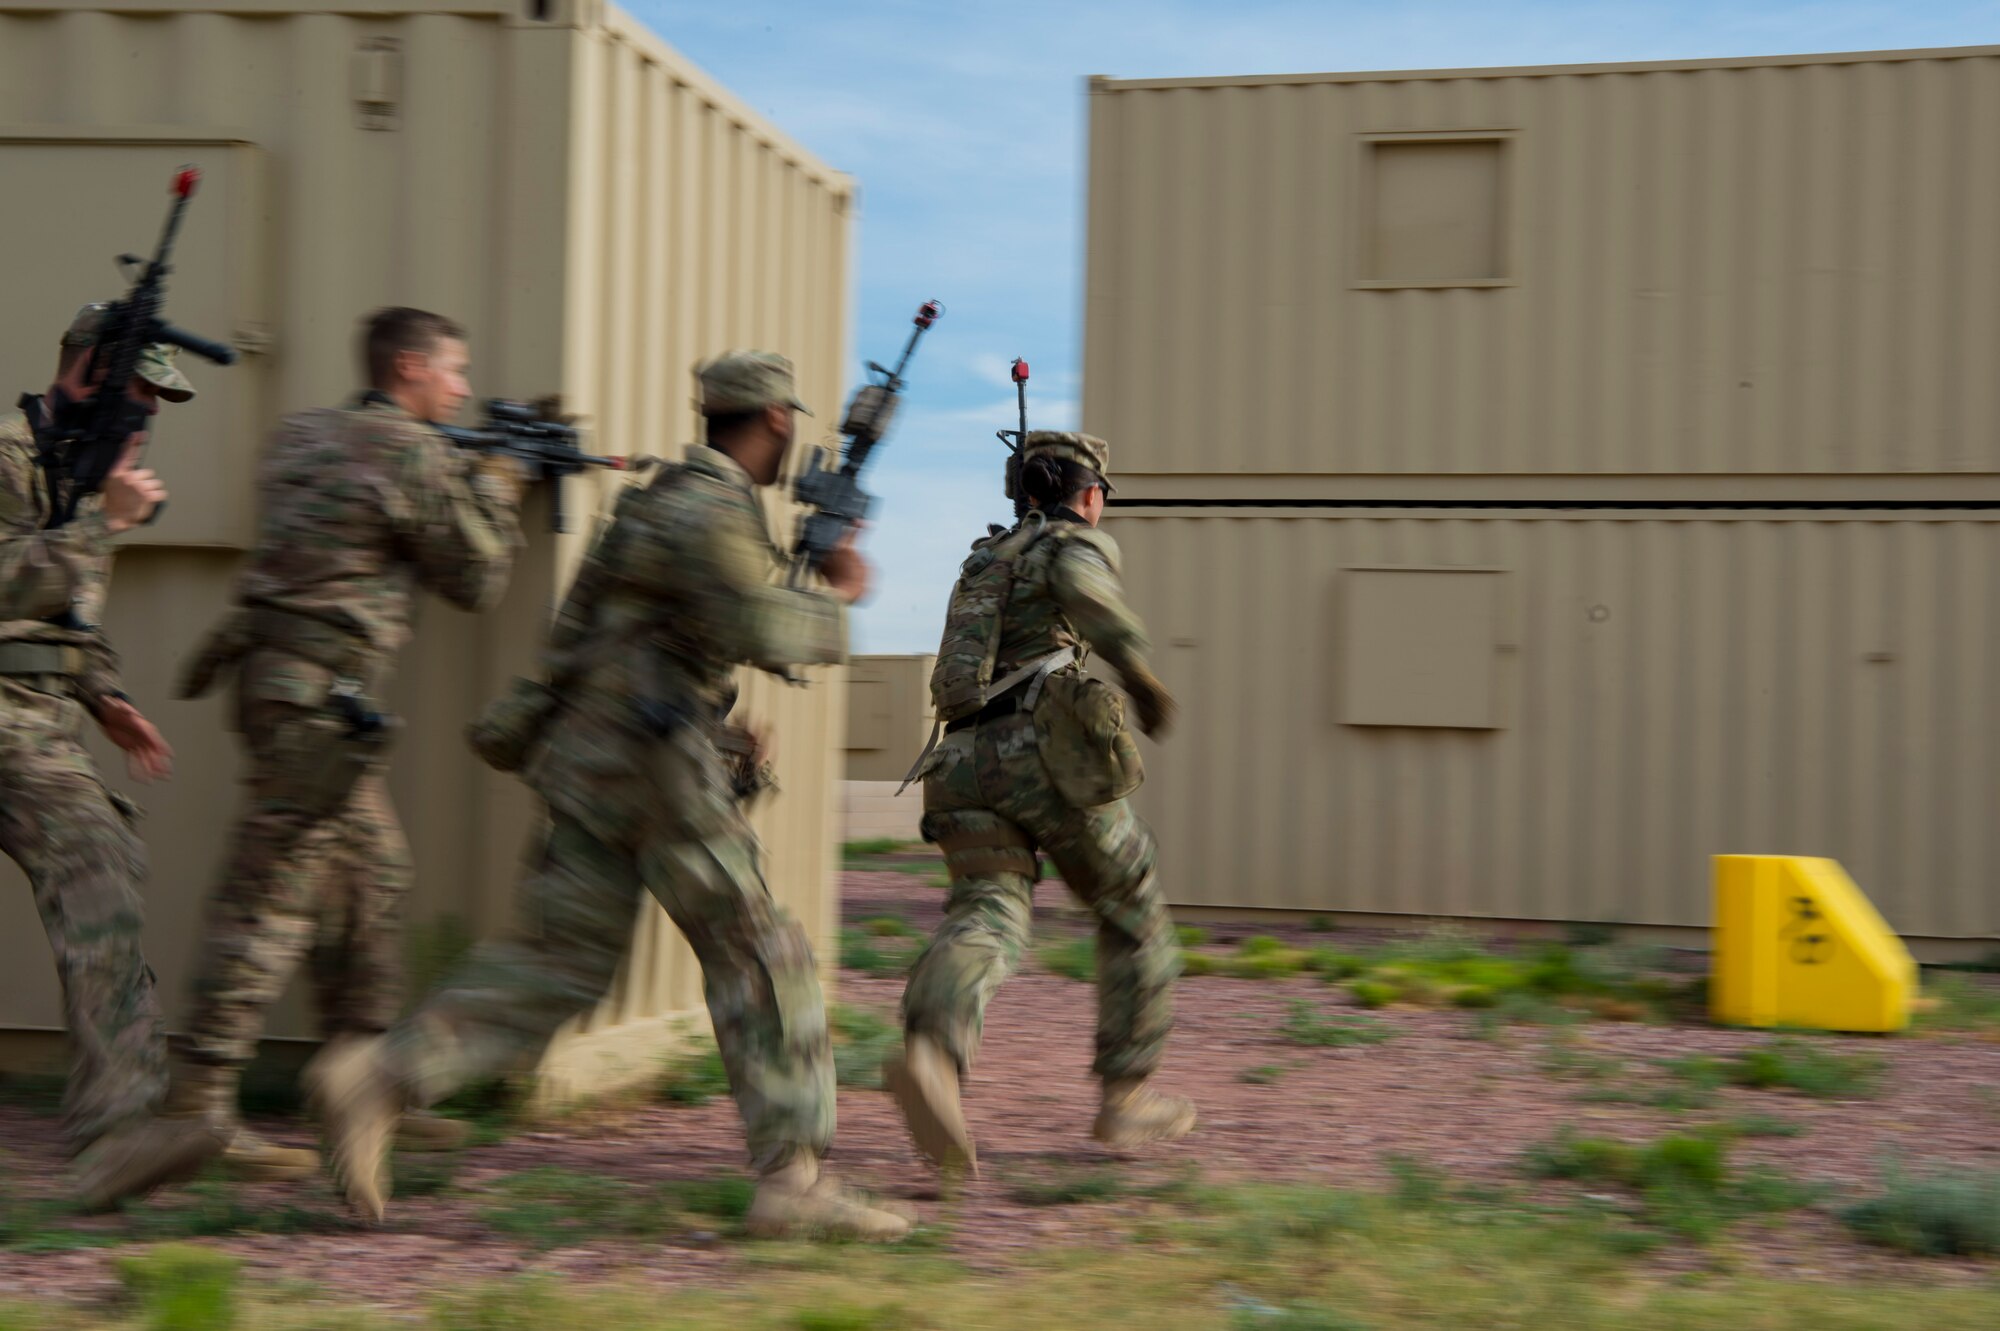 Defenders from Minot Air Force Base’s 791st Missile Security Forces Squadron, sprint to cover during an urban improvised explosive device course at Camp Guernsey, Wyo., July 19, 2017. Defenders are placed in multiple scenarios to include search and rescue and capturing enemy held positions. (U.S. Air Force photo by Staff Sgt. Christopher Ruano)

